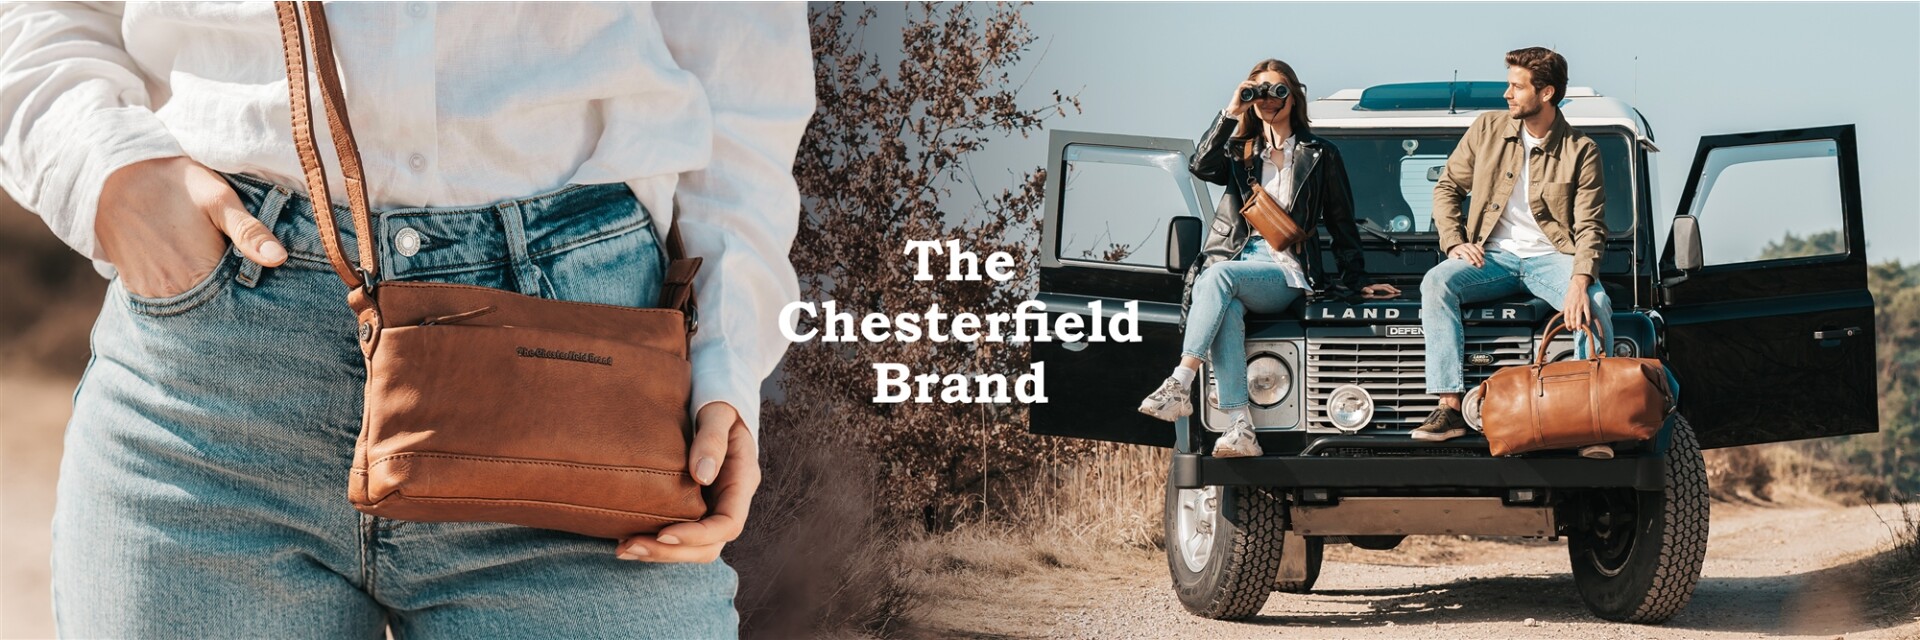 The Chesterfield Brand 02 FS 2023